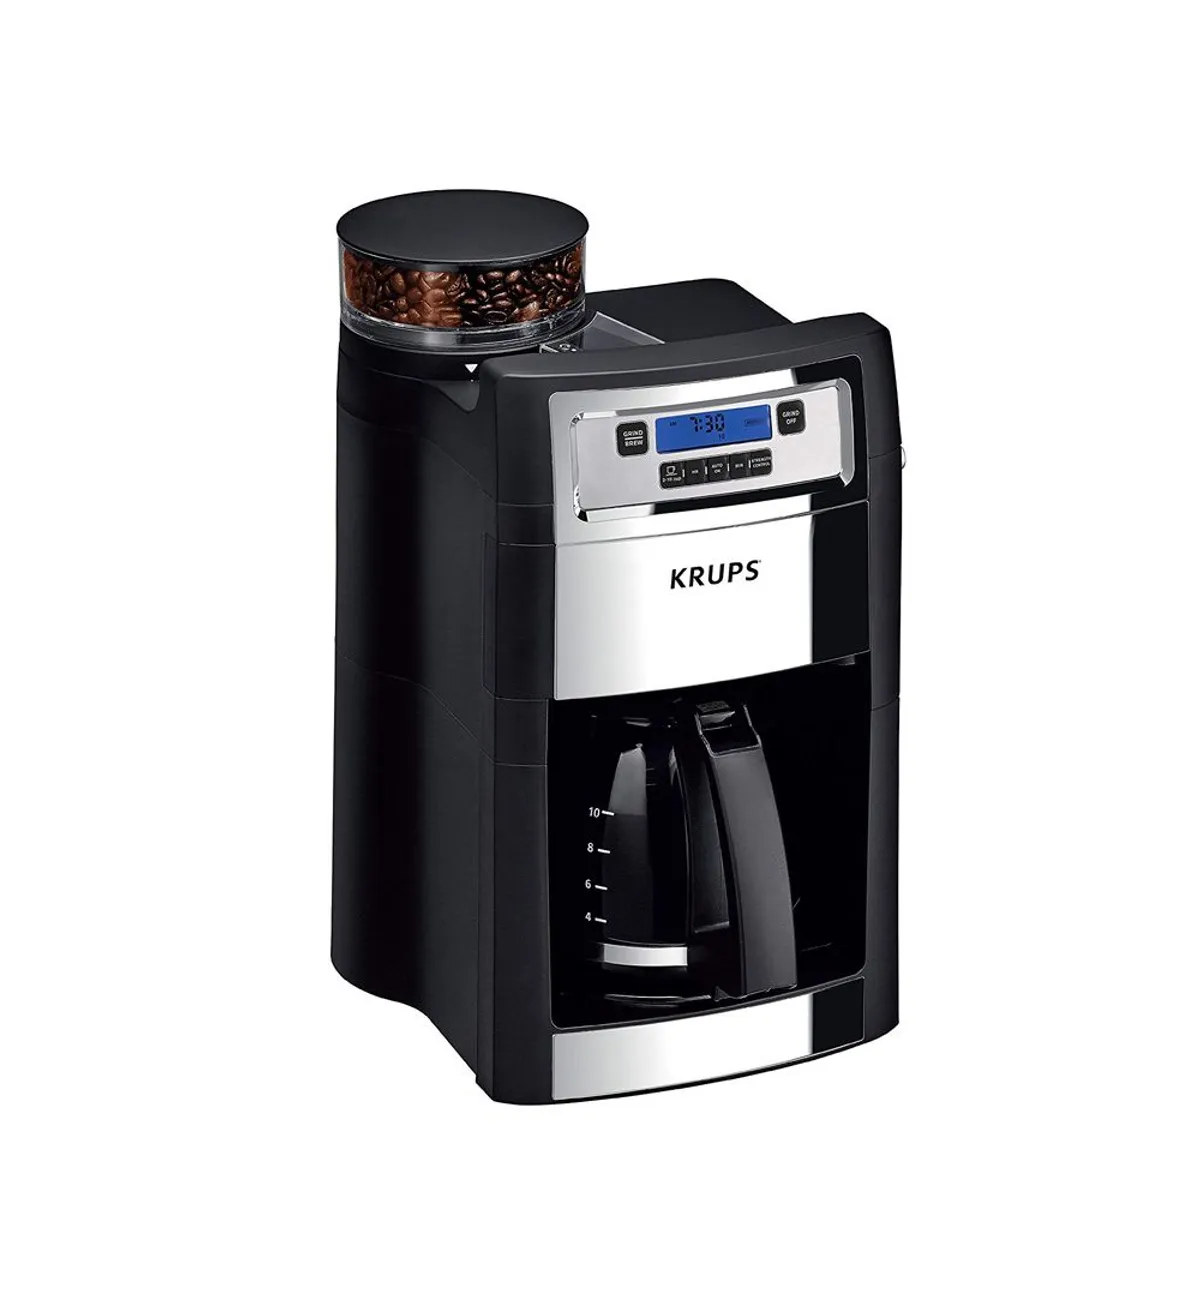 KRUPS Grind and Brew Coffee Machine review